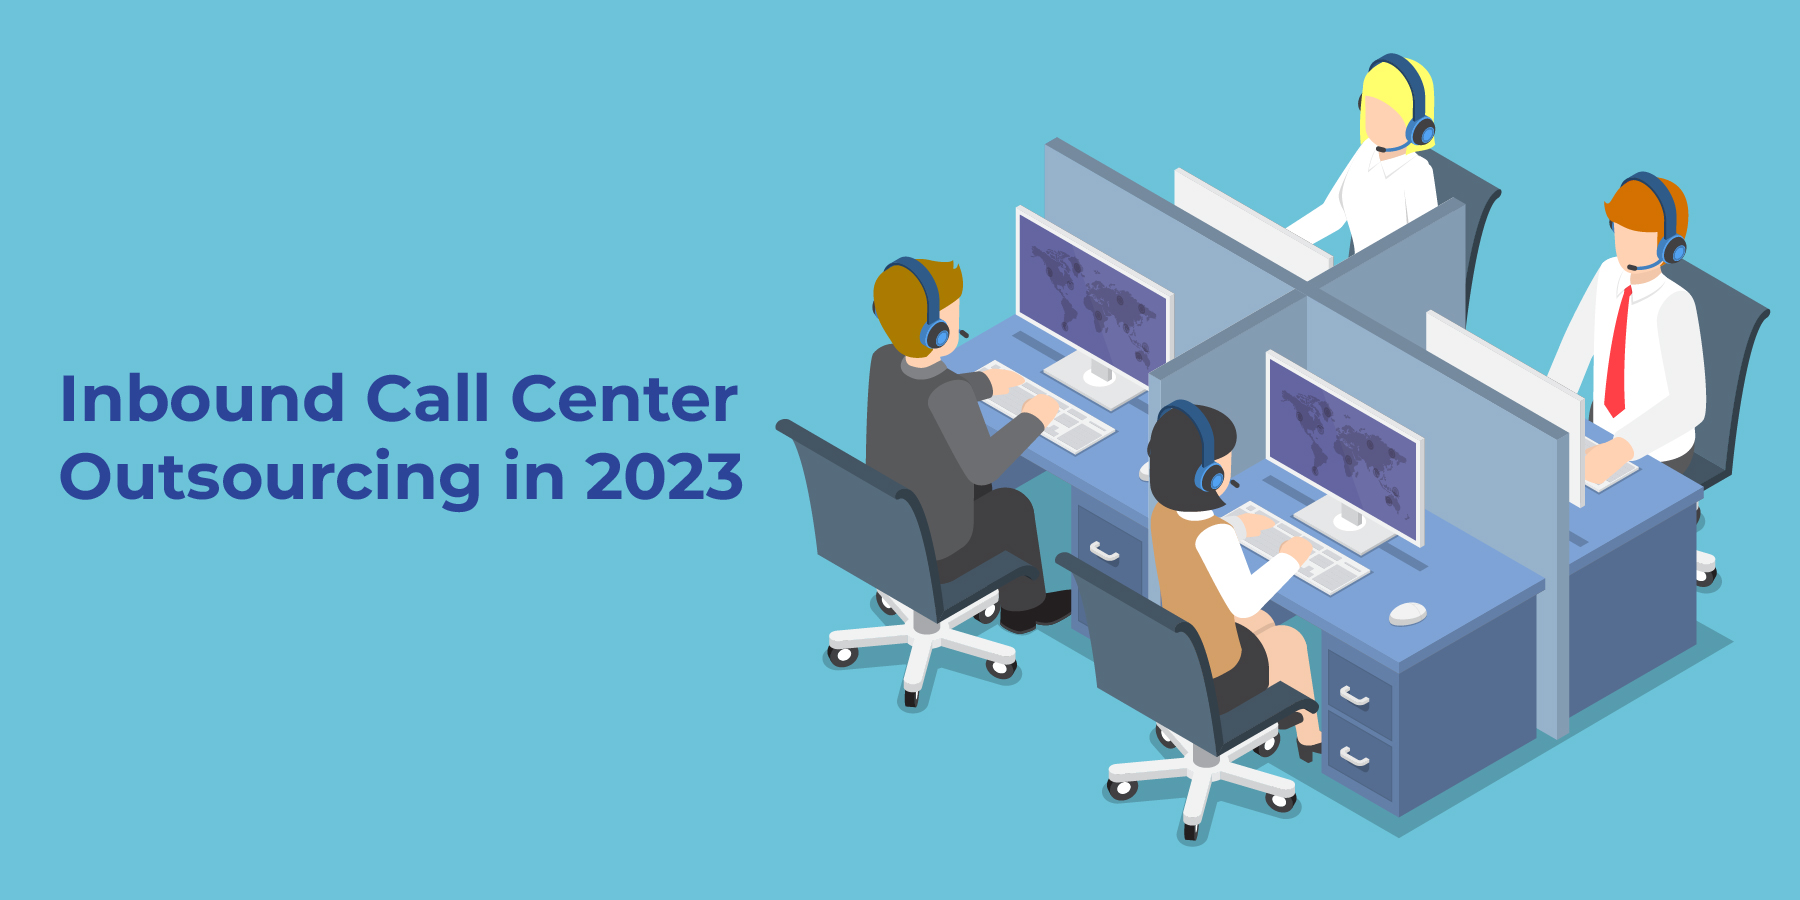 Inbound Call Center Outsourcing in 2023